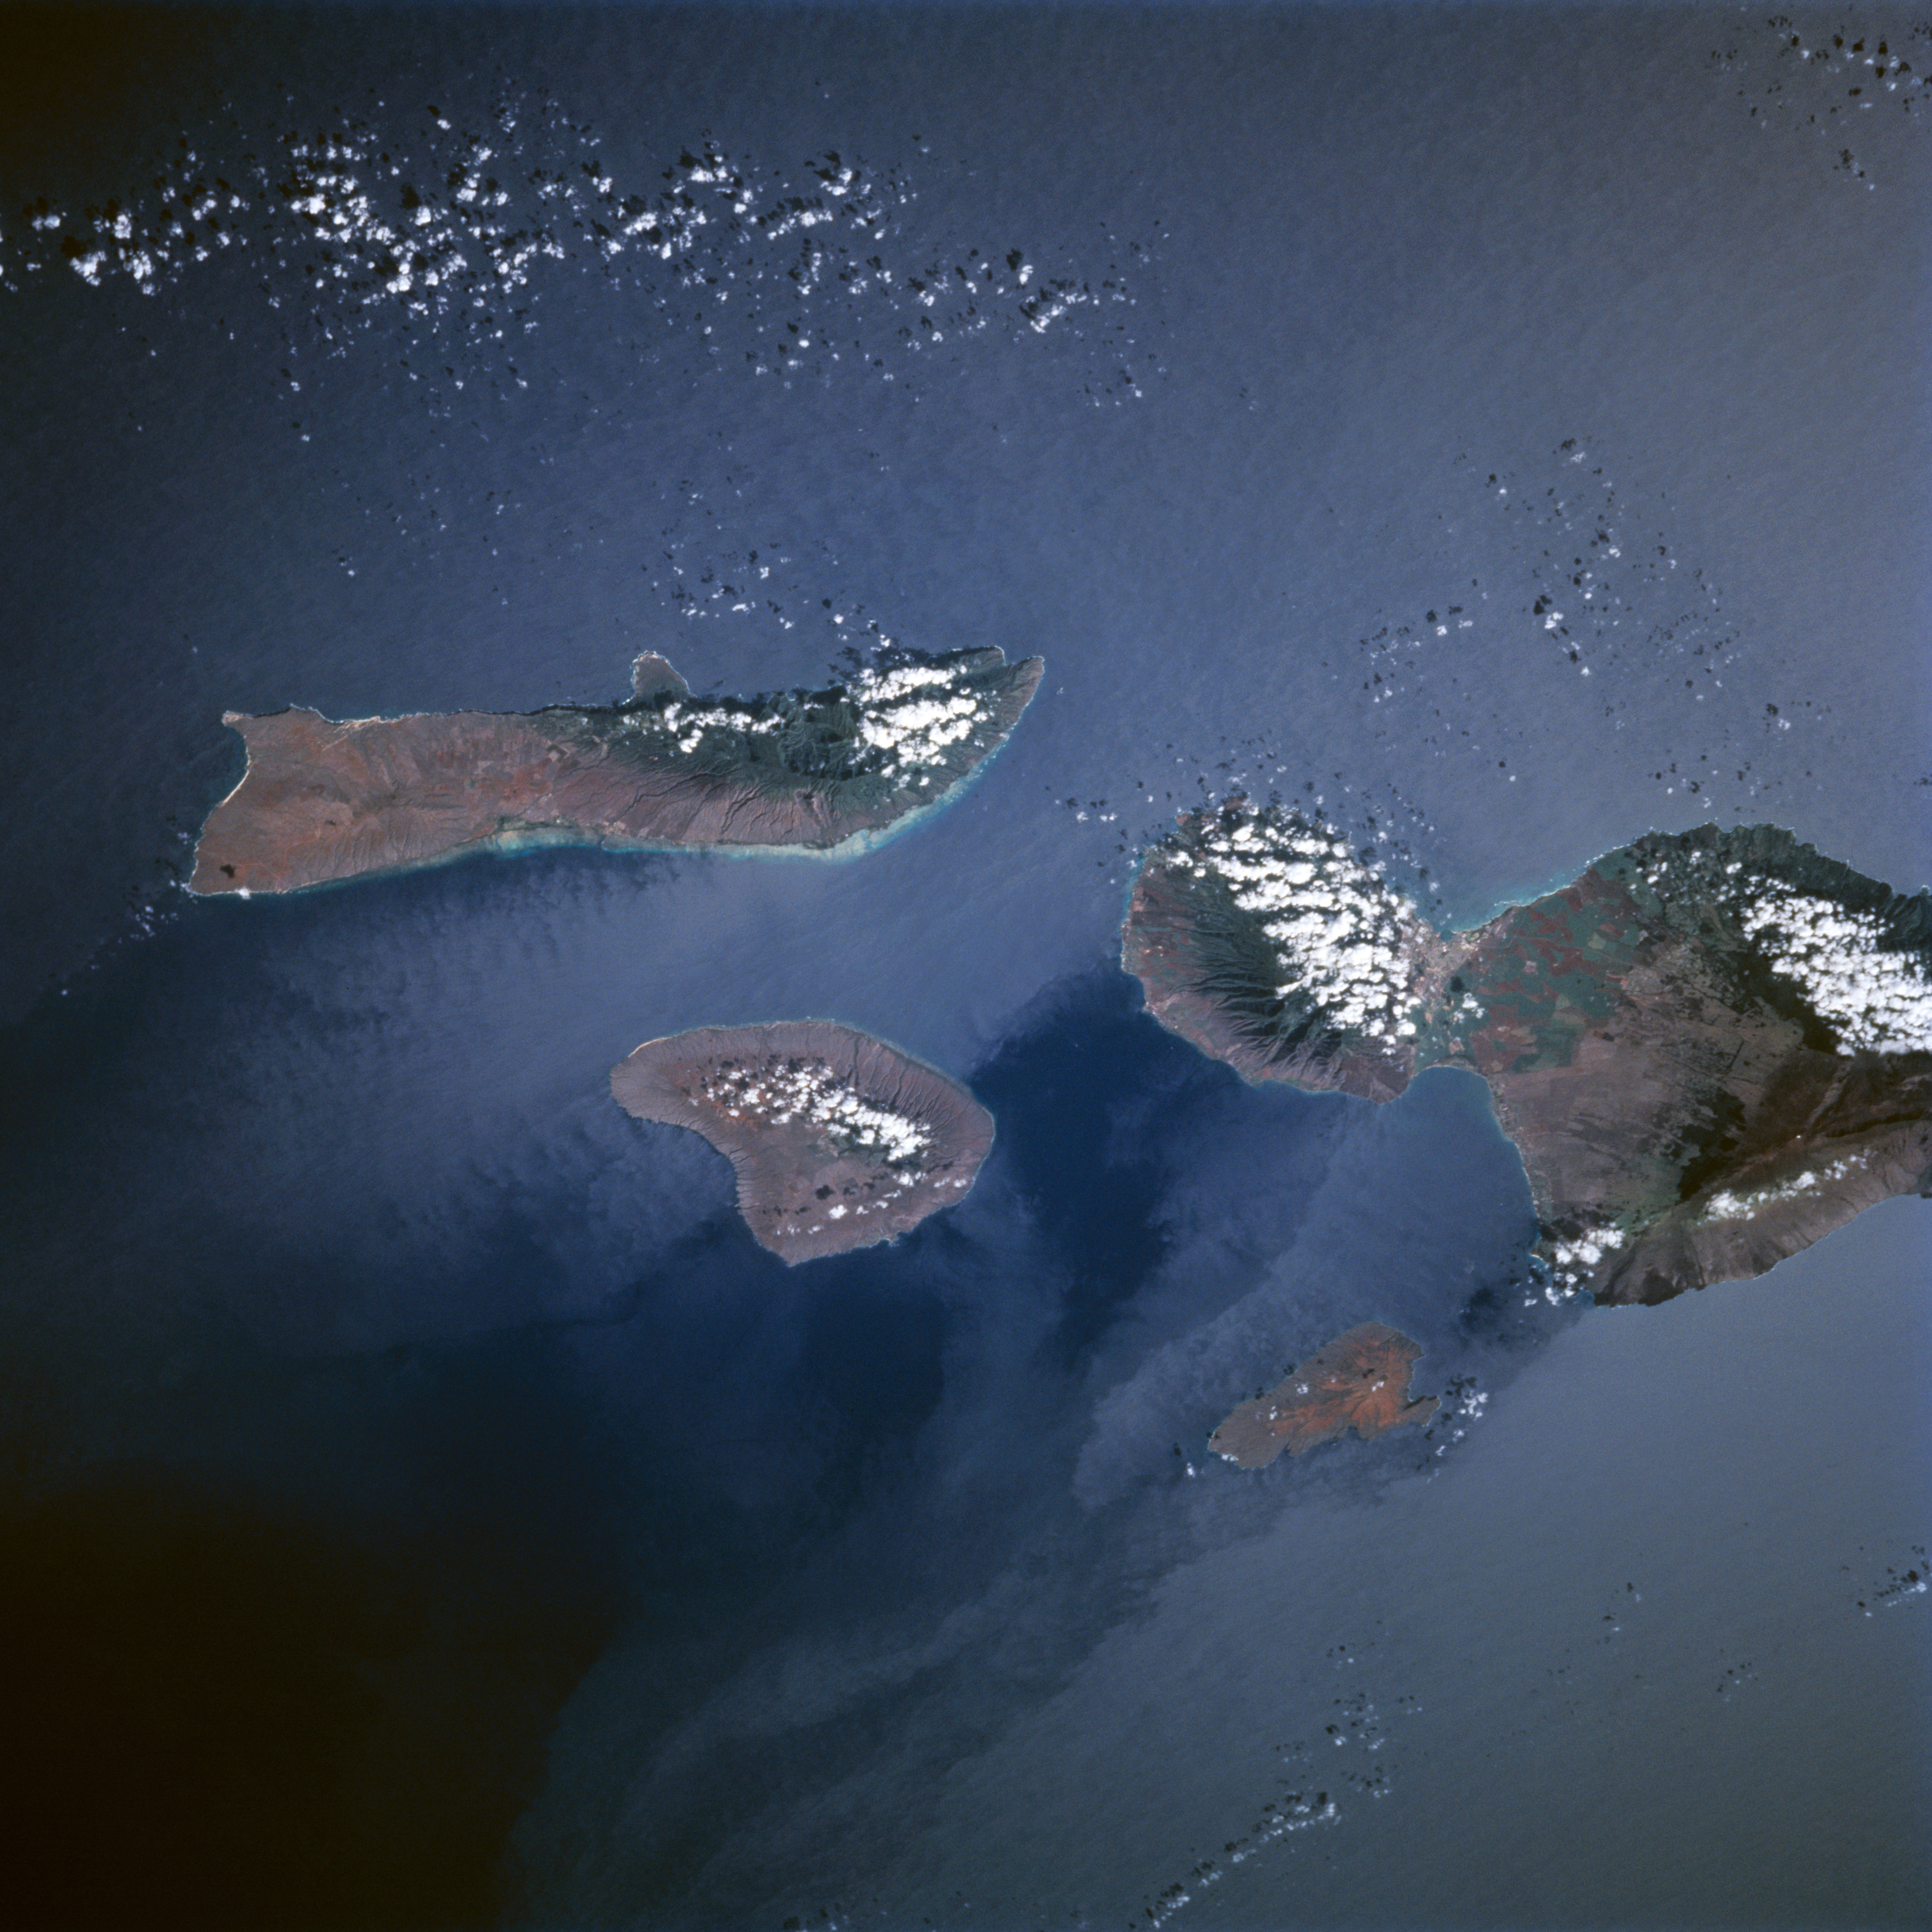 Photograph of the Hawaiian Islands  taken by the STS-95 crew 